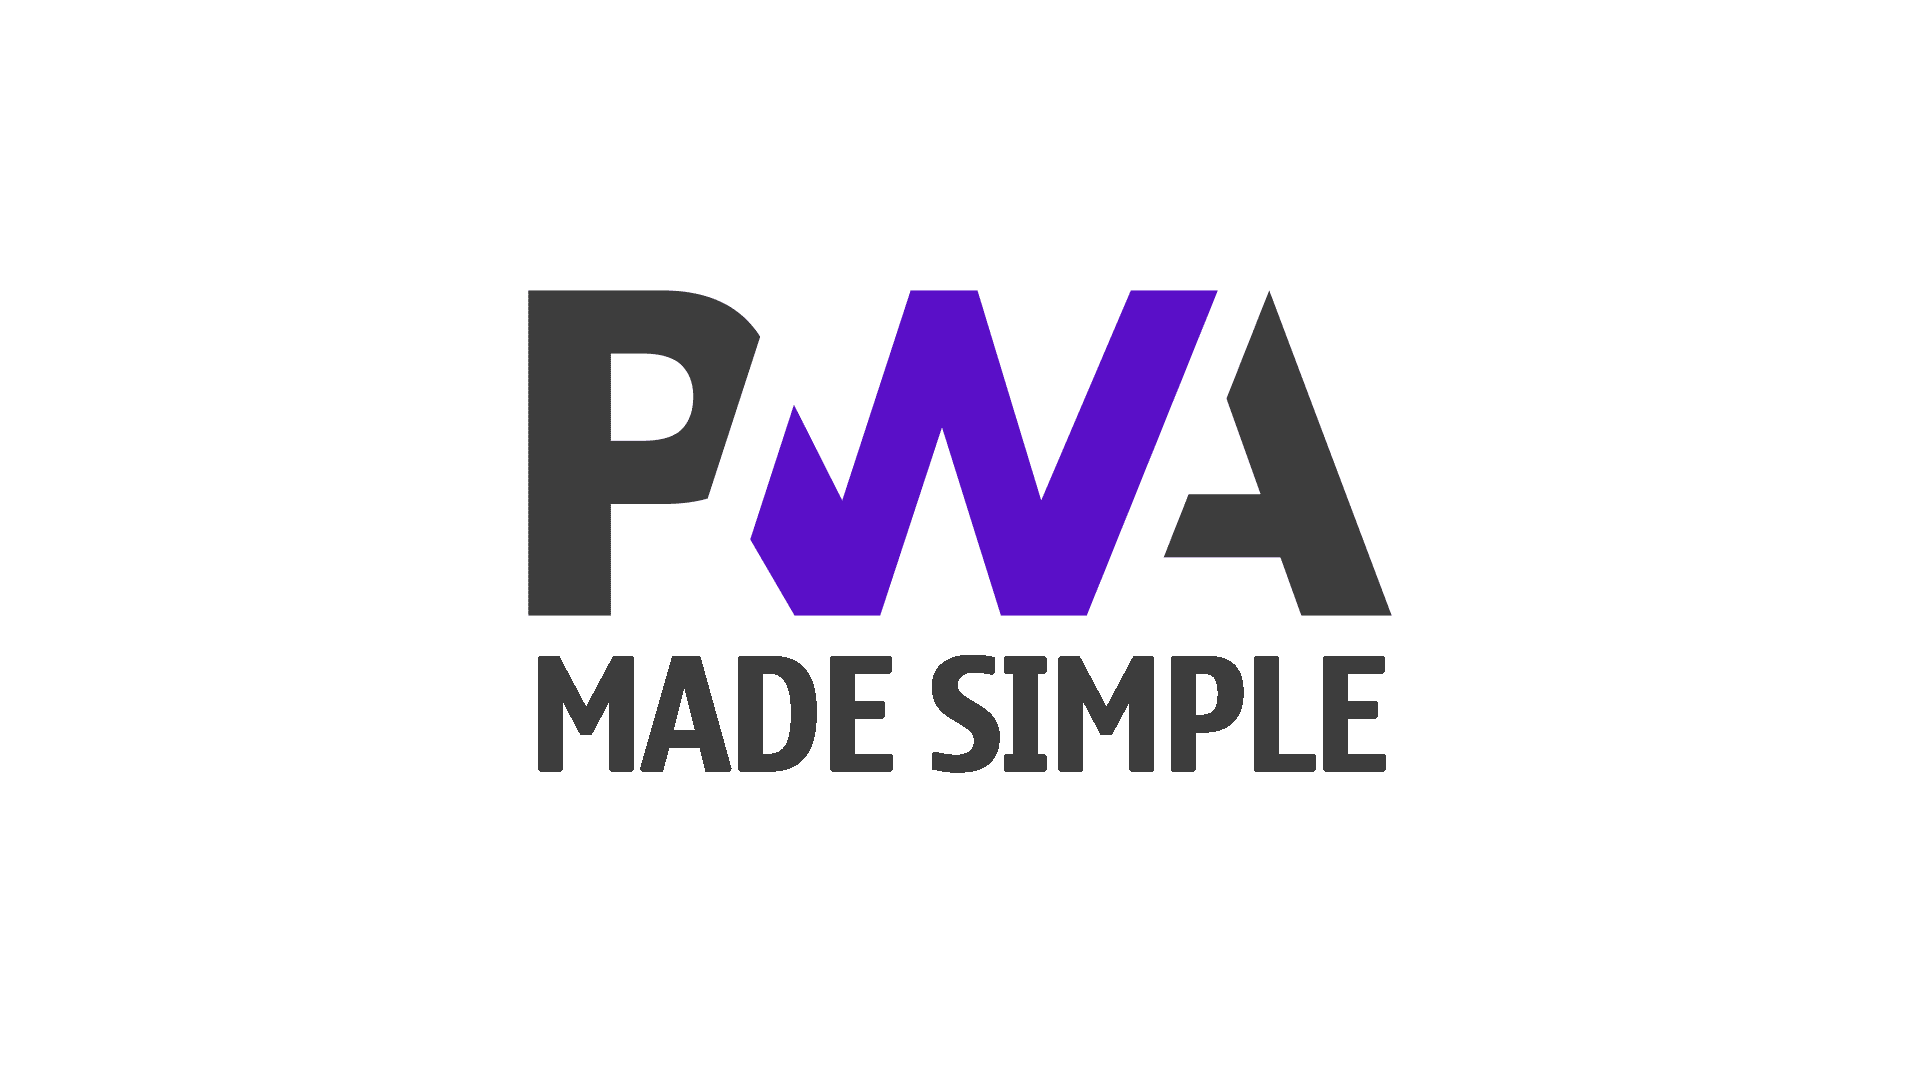 Simple implementation of PWA on a website with a Mobile First Design approach